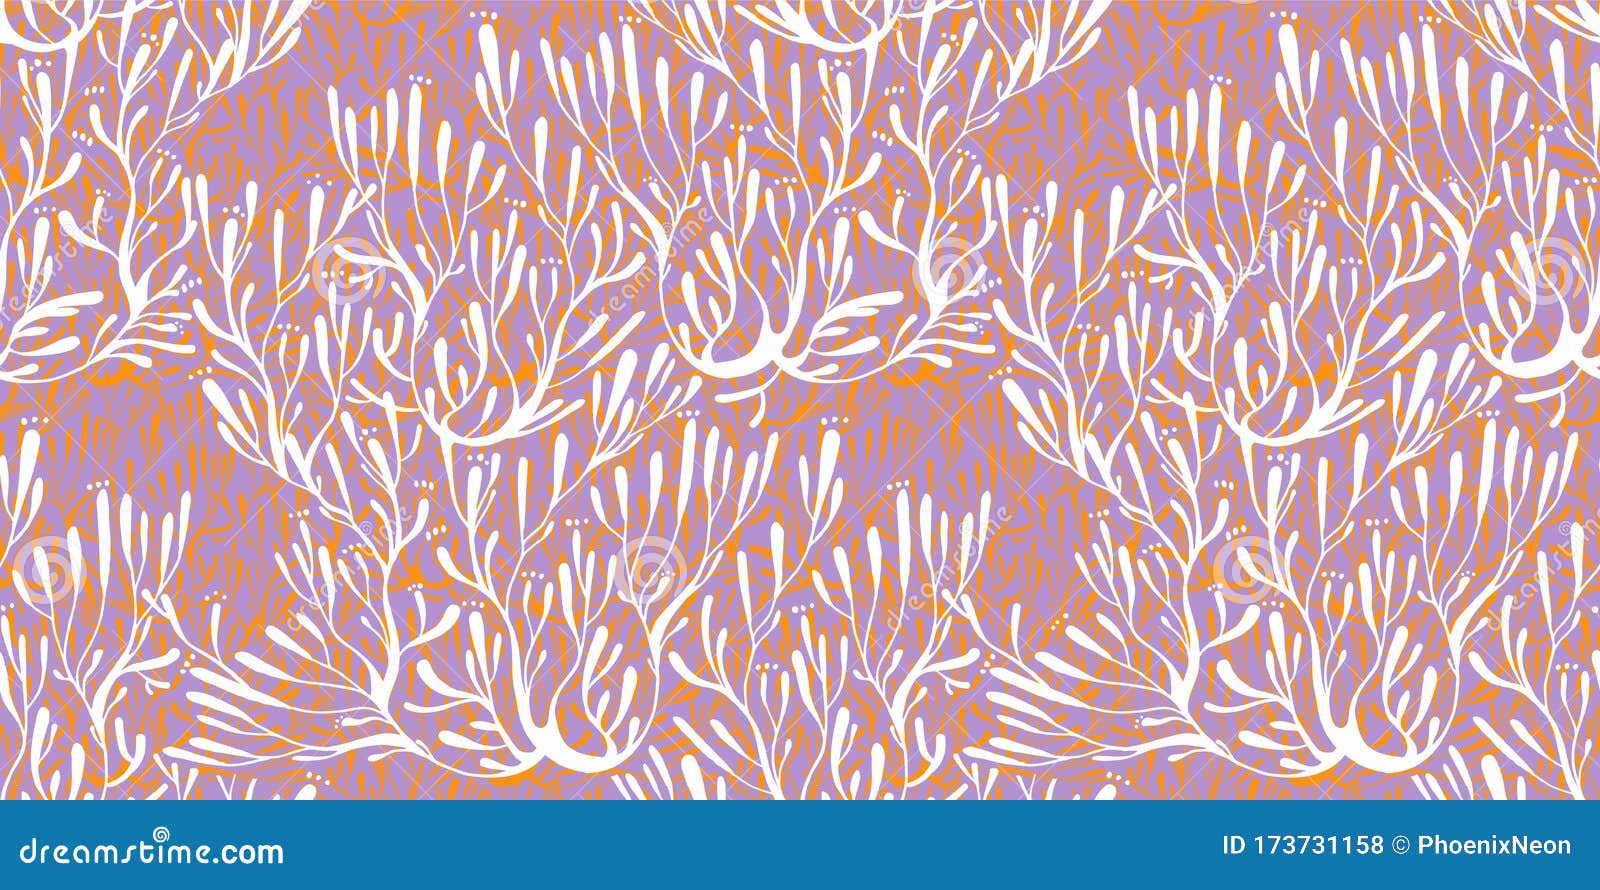 Coral Seaweed in the Ocean or Tree Branches Seamless Pattern. Stock ...